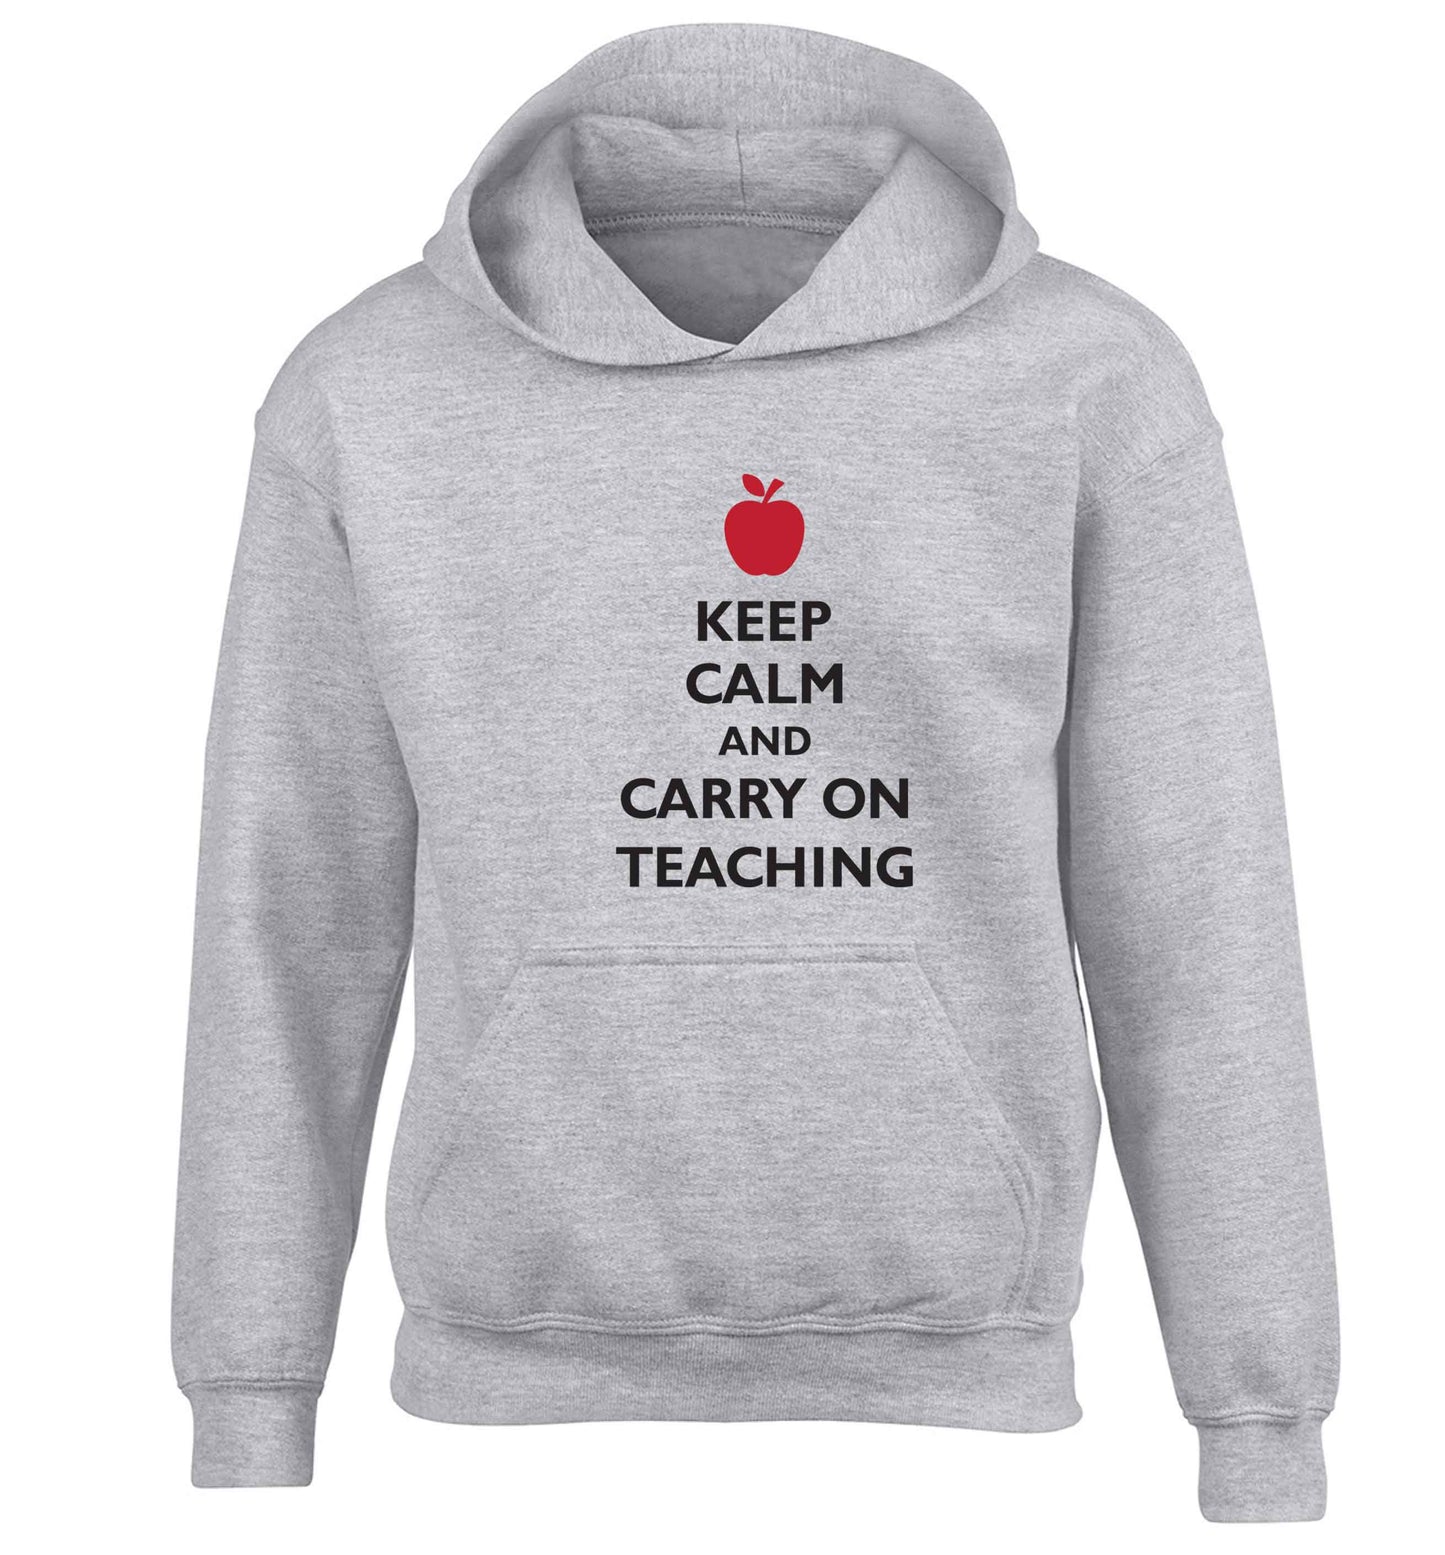 Keep calm and carry on teaching children's grey hoodie 12-13 Years